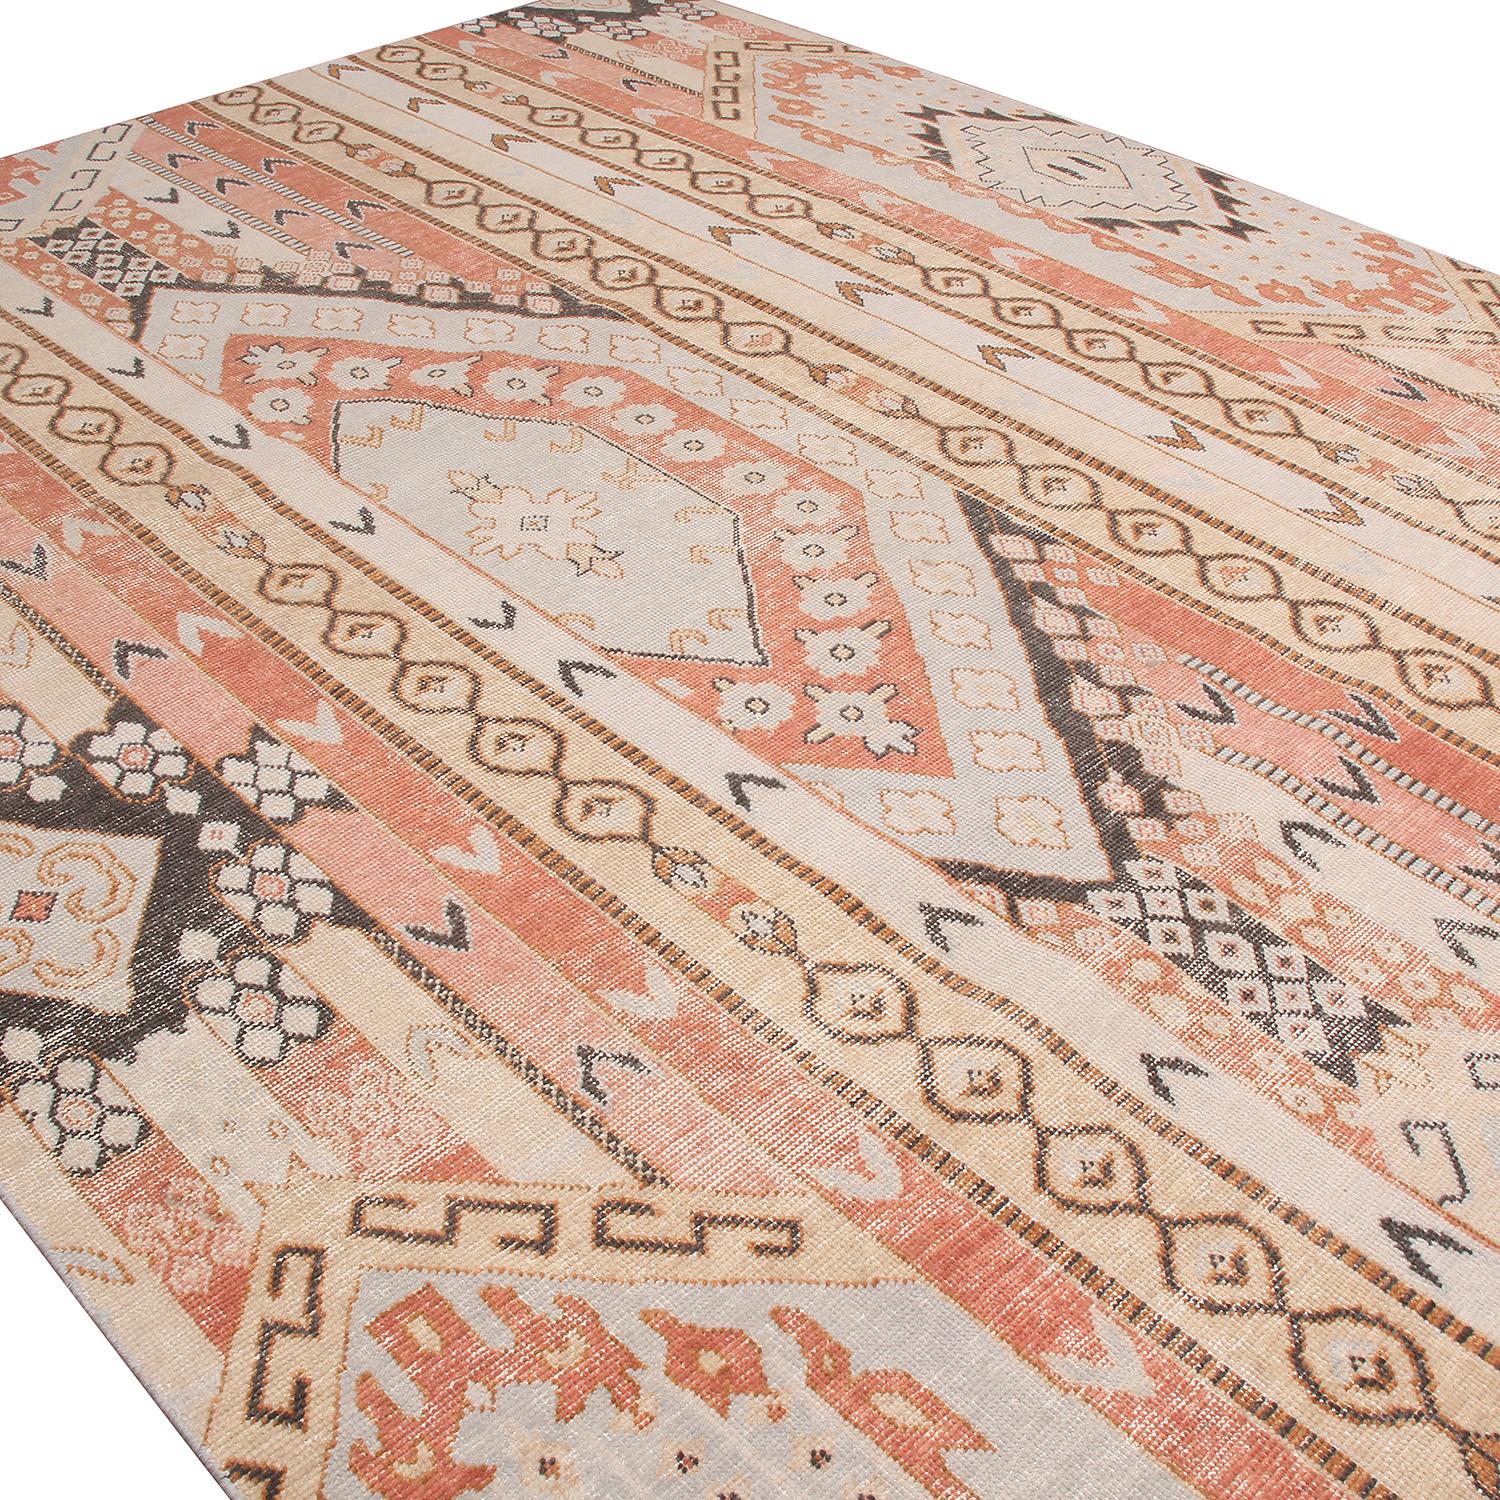 Indian Rug & Kilim’s Beige Blue and Russet Red Wool Rug from the Homage Collection